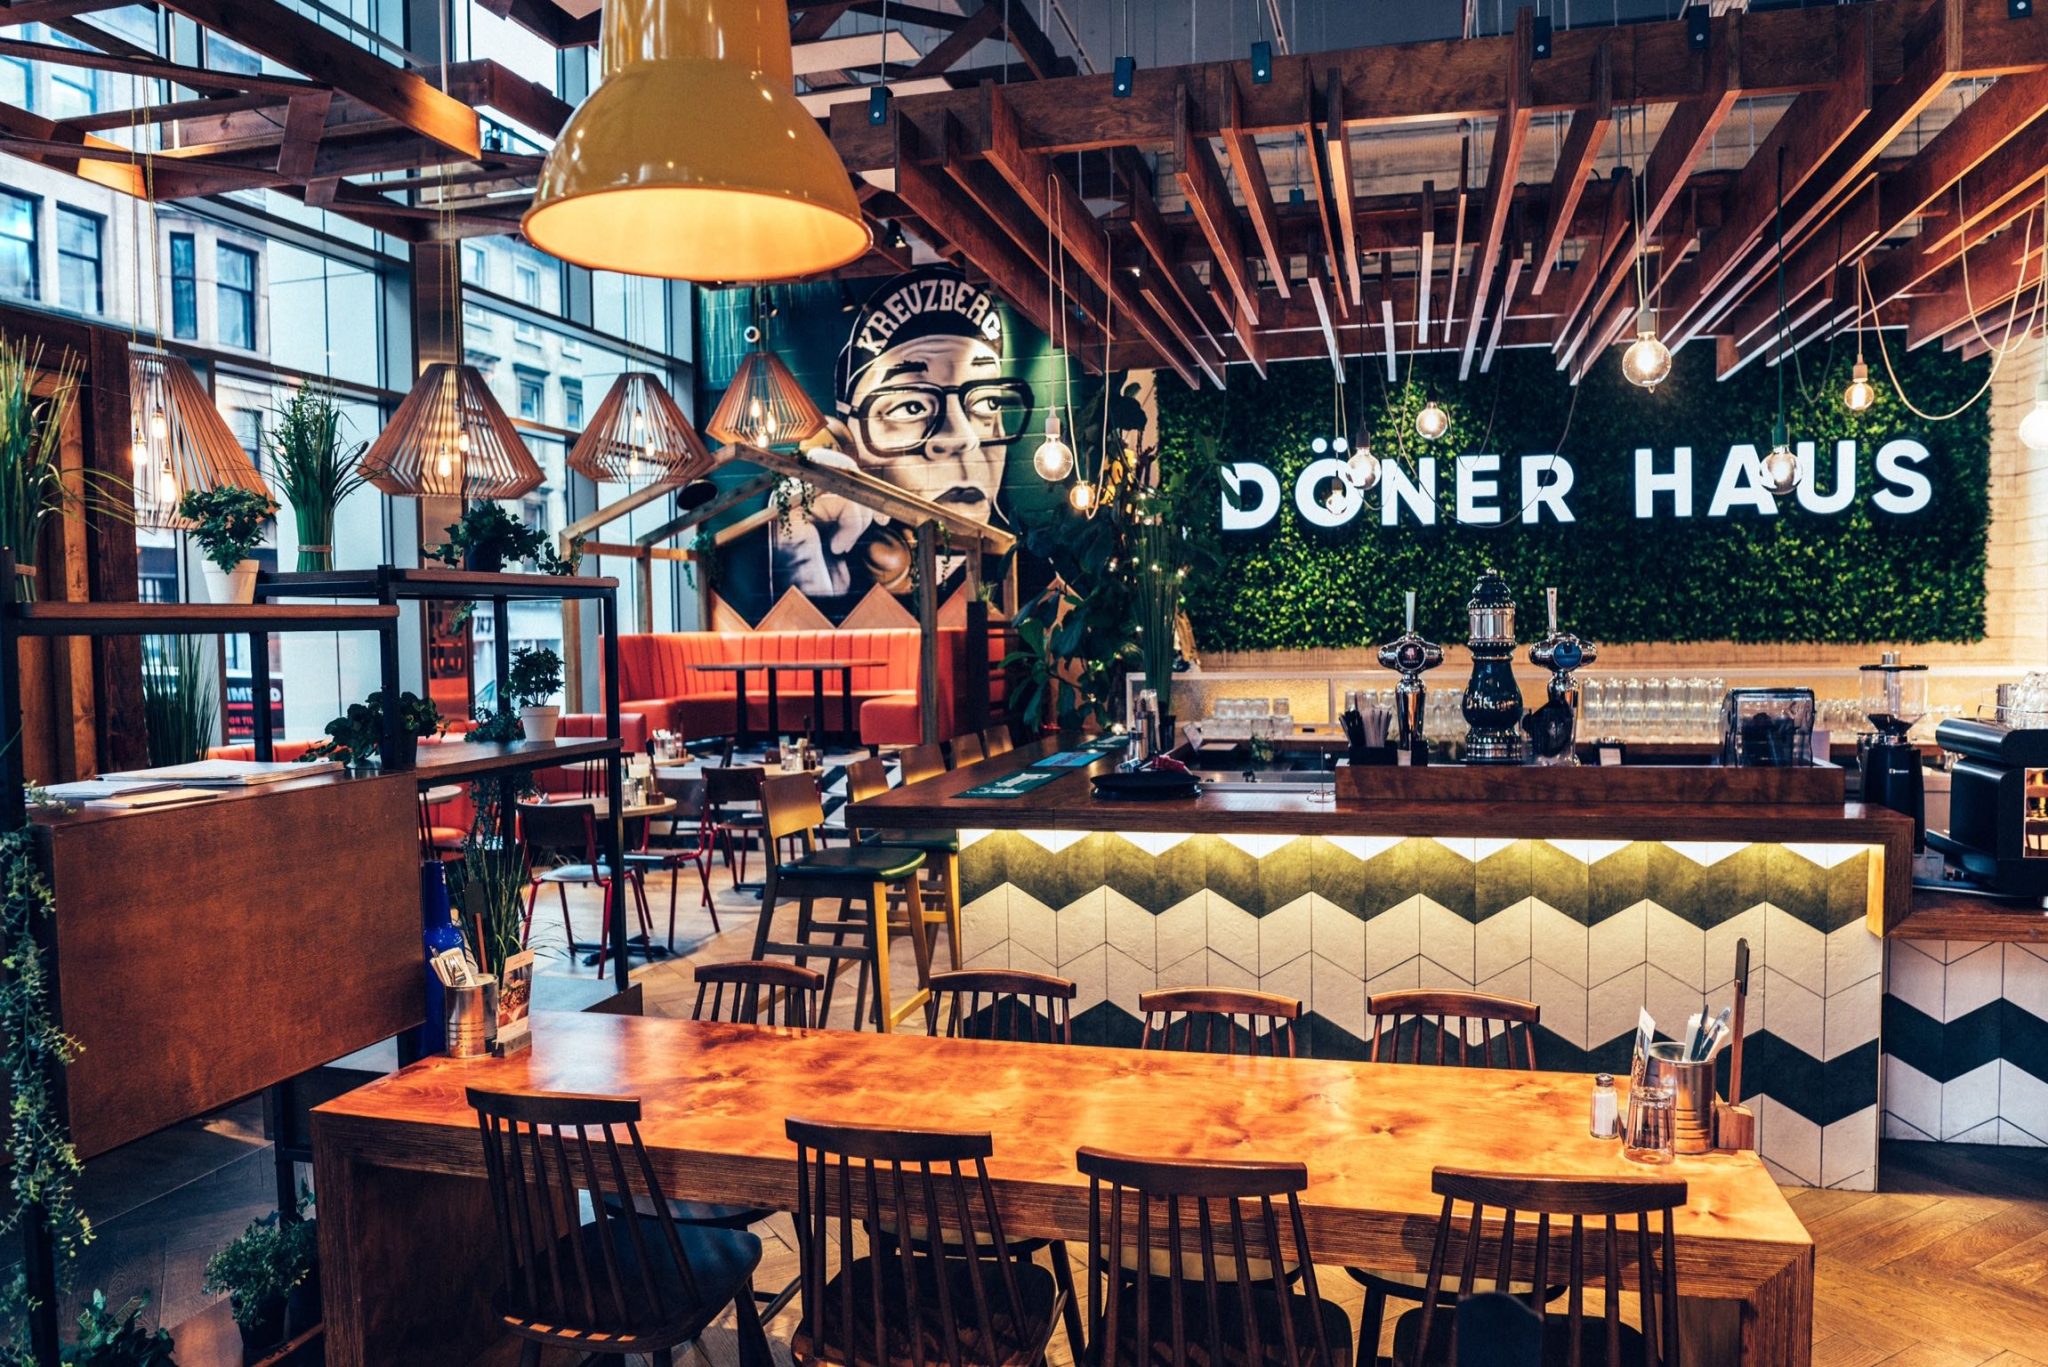 A taste of Berlin comes to Manchester with Döner Haus